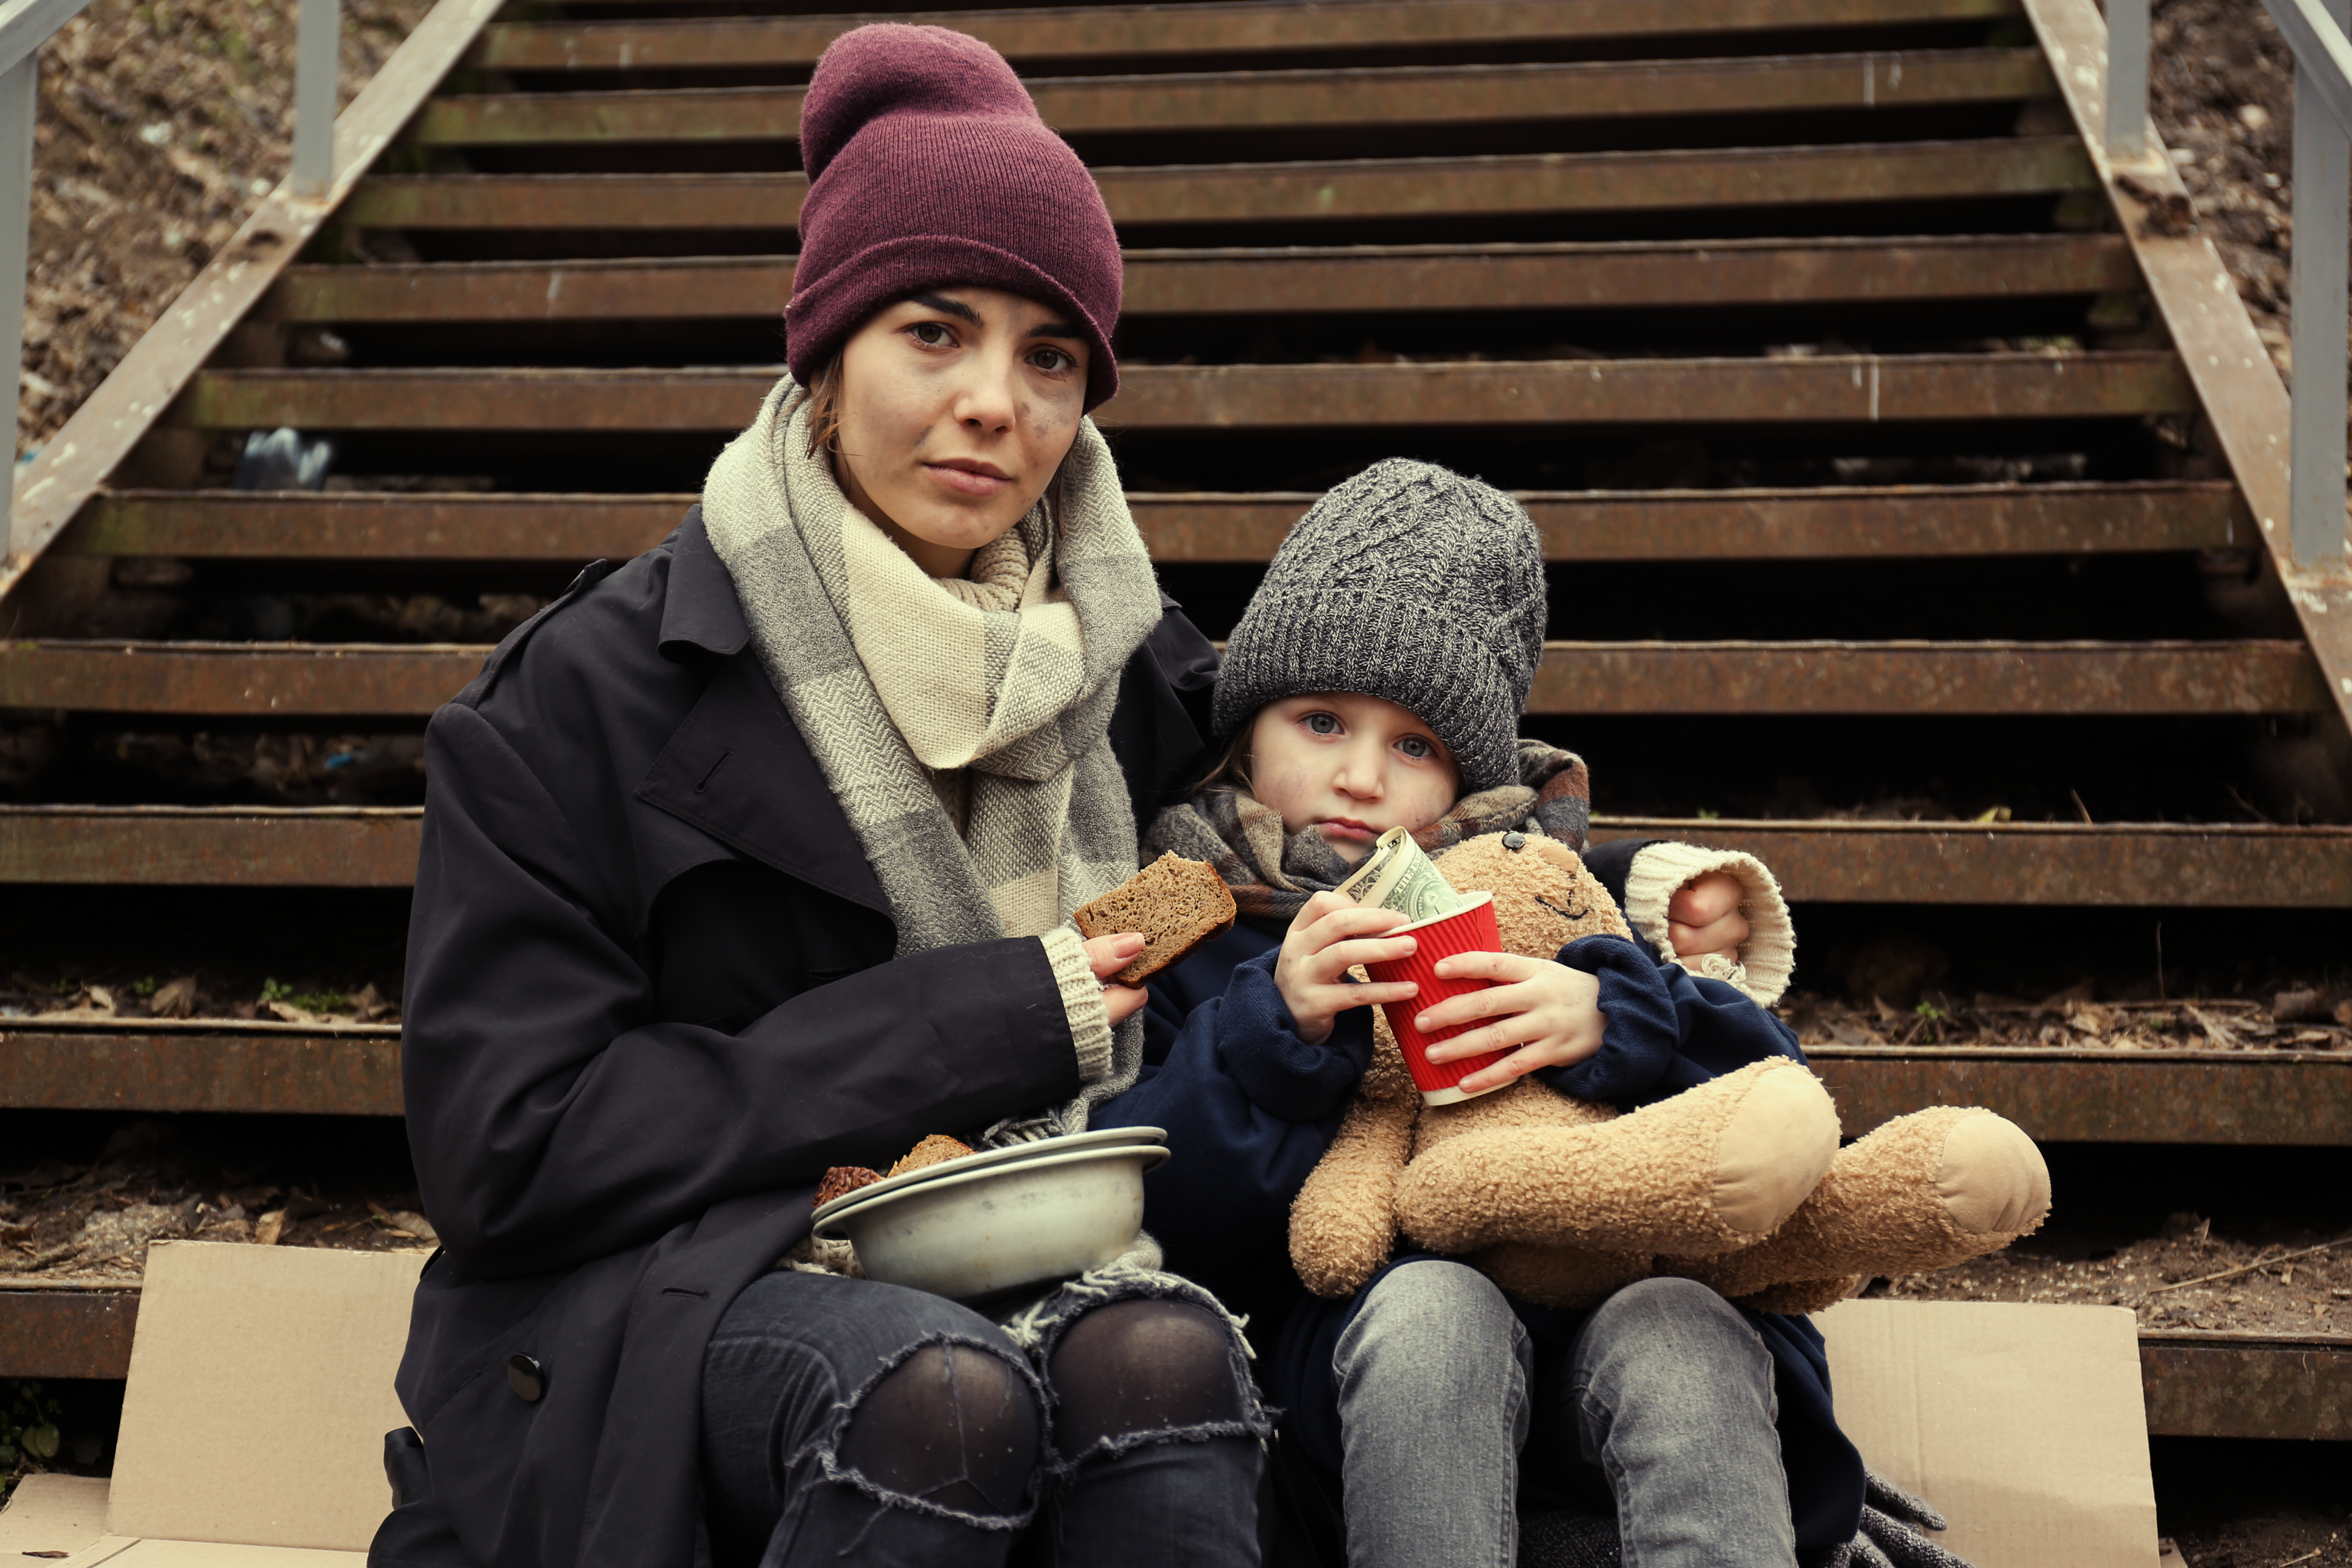 A homeless mother and child | Source: Shutterstock